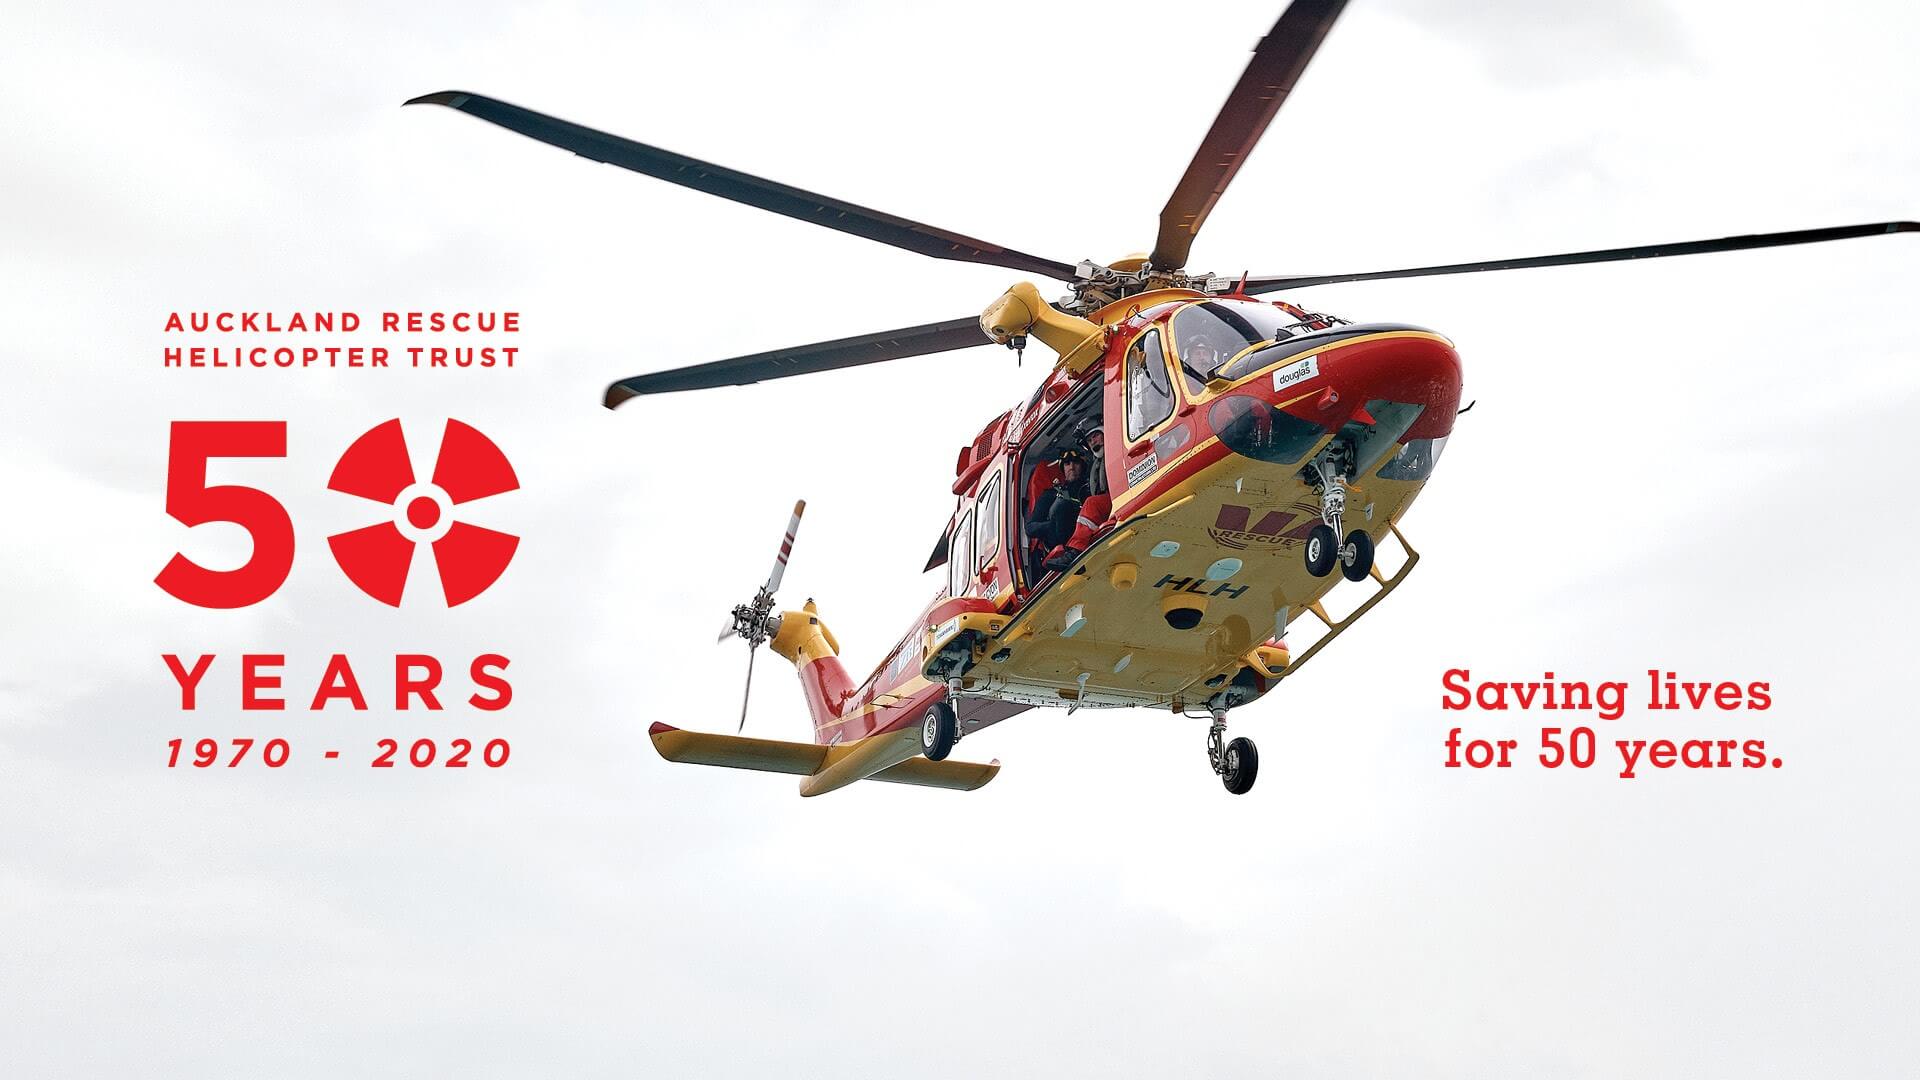 Sponsor of the Westpac Rescue Helicopter